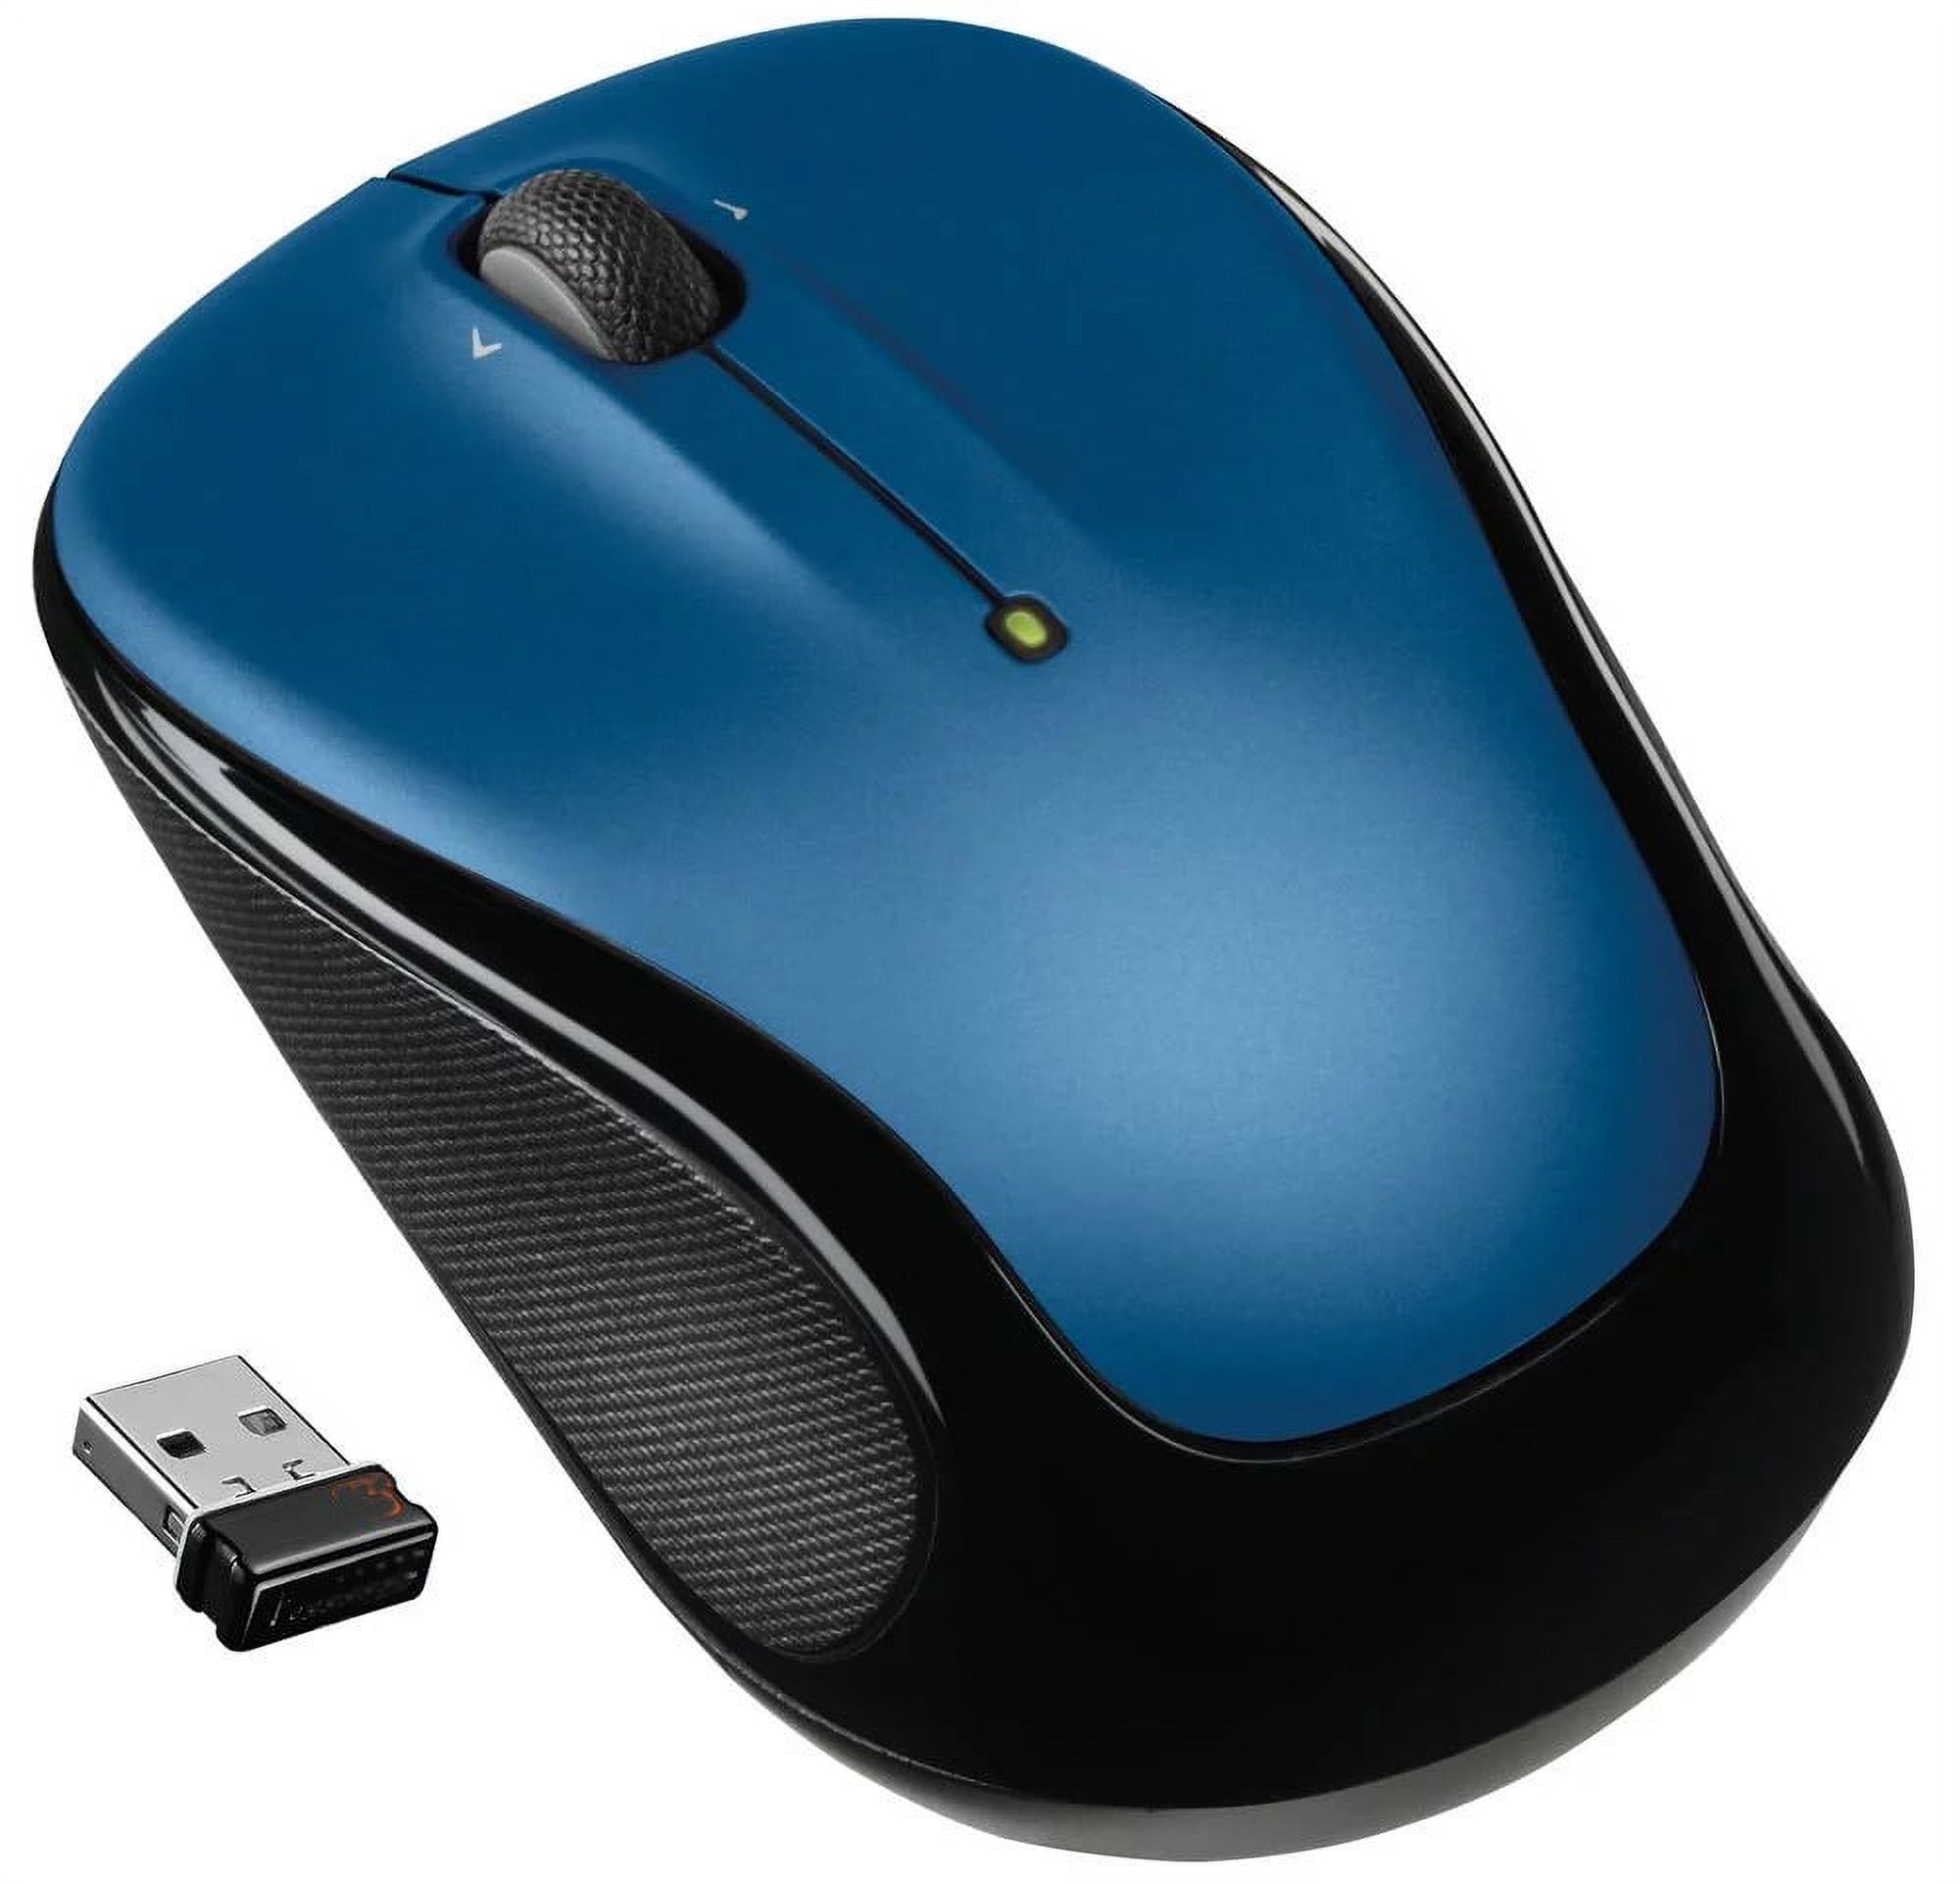 Logitech Compact Wireless Mouse, 2.4 GHz with USB Unifying Receiver, Optical Tracking, Blue - image 3 of 6